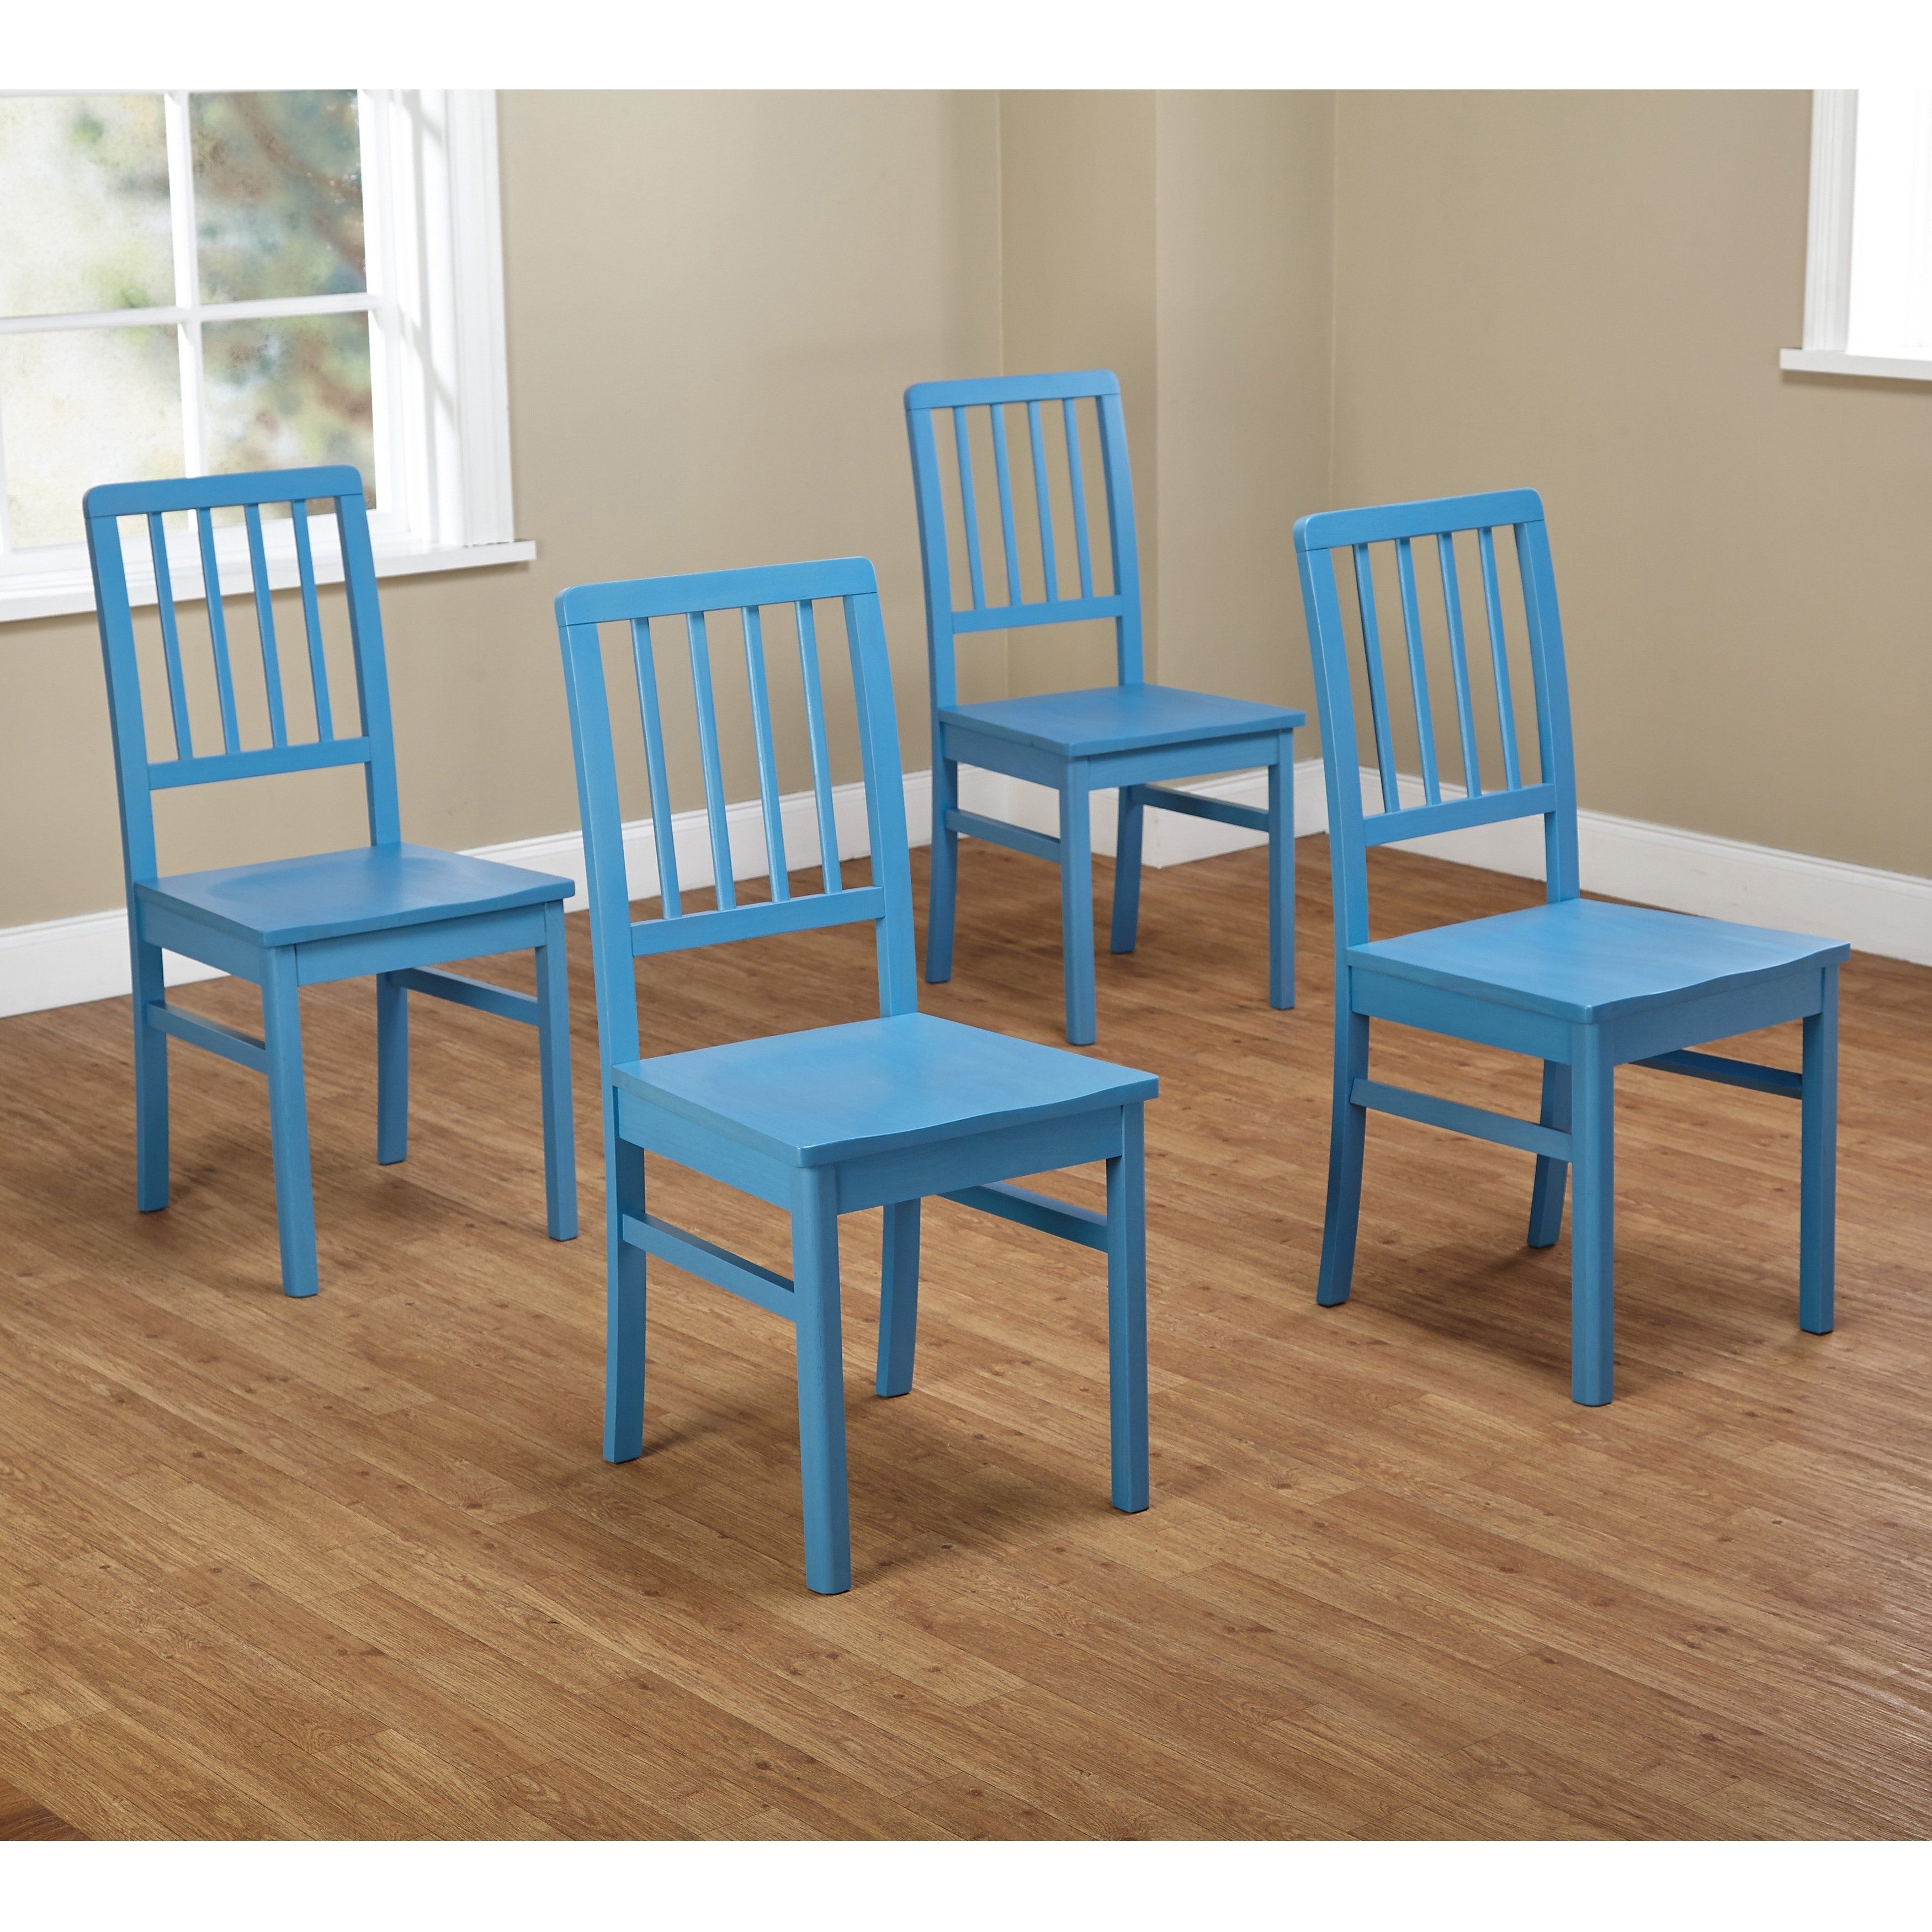 Most Recent Camden Dining Chairs Inside Shop Simple Living Camden Dining Chair (set Of 4) – Free Shipping (View 6 of 20)